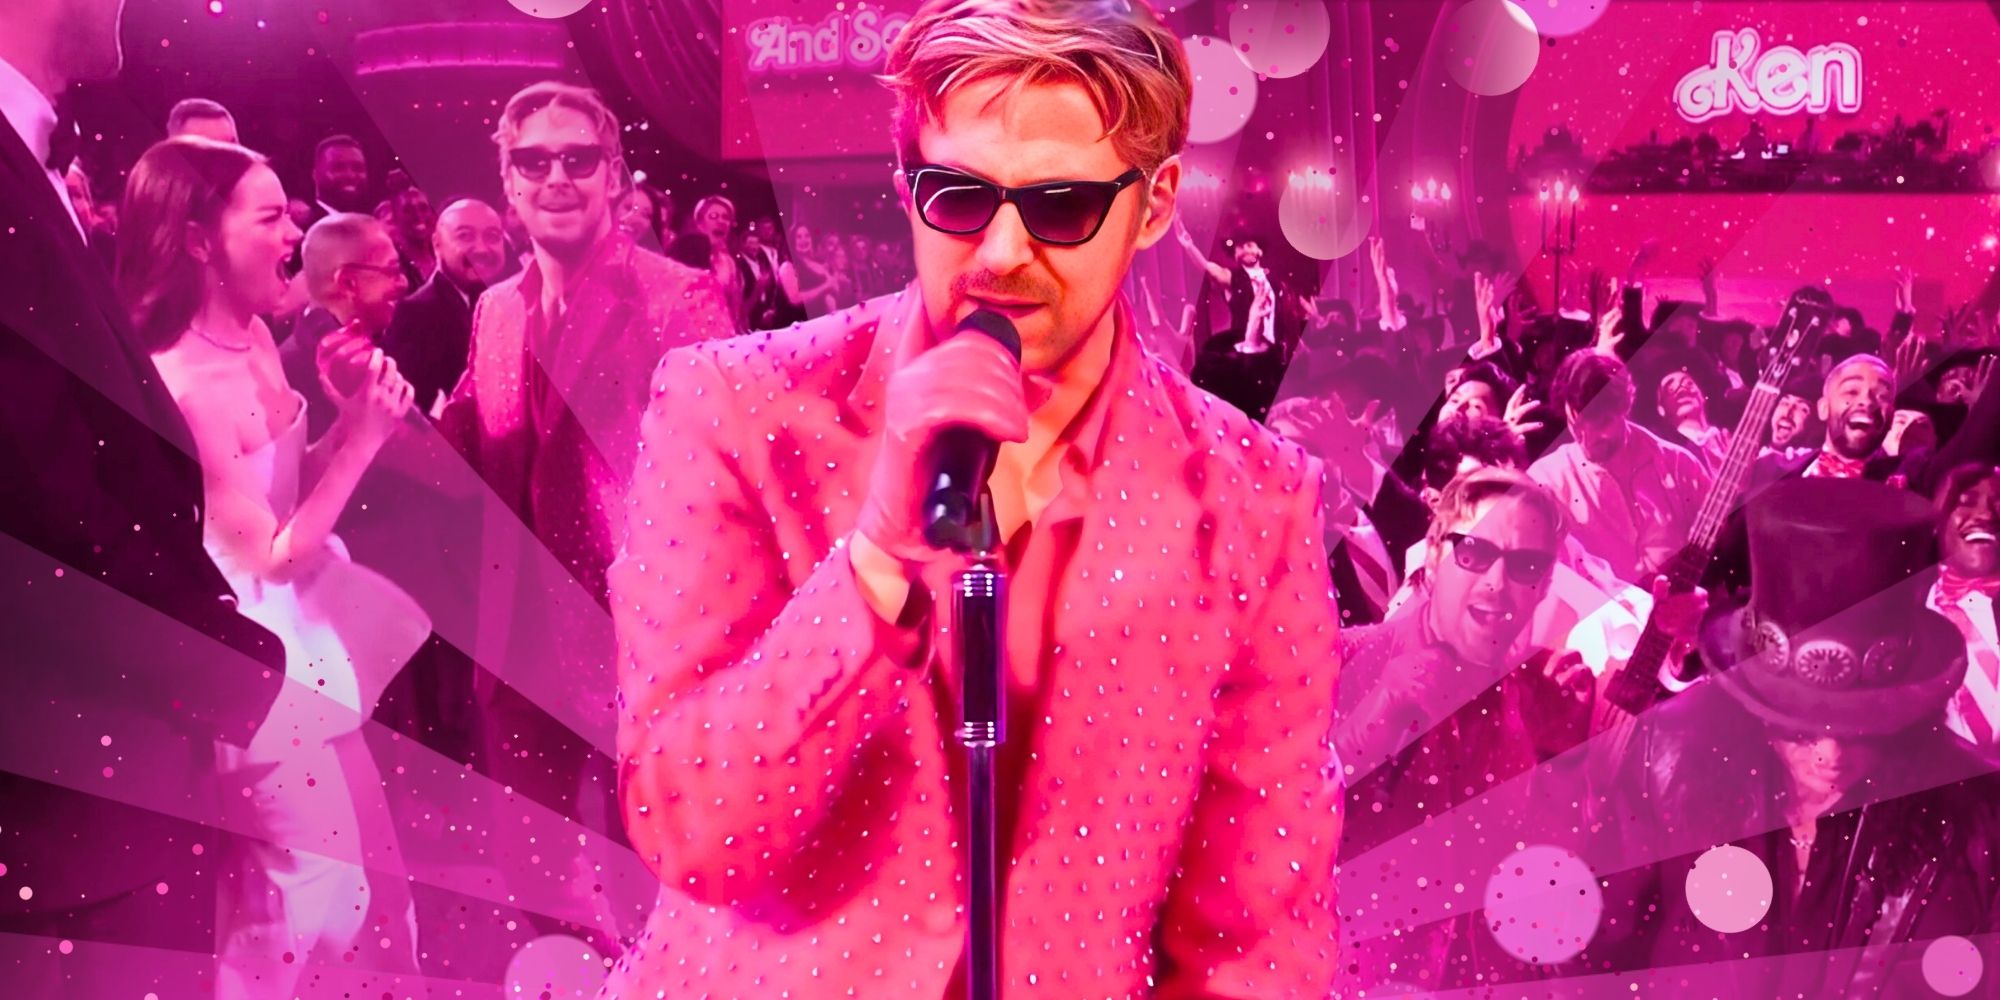 Ryan Gosling singing at the Oscars in a pink, sparkly suit and Oscars imagery behind him